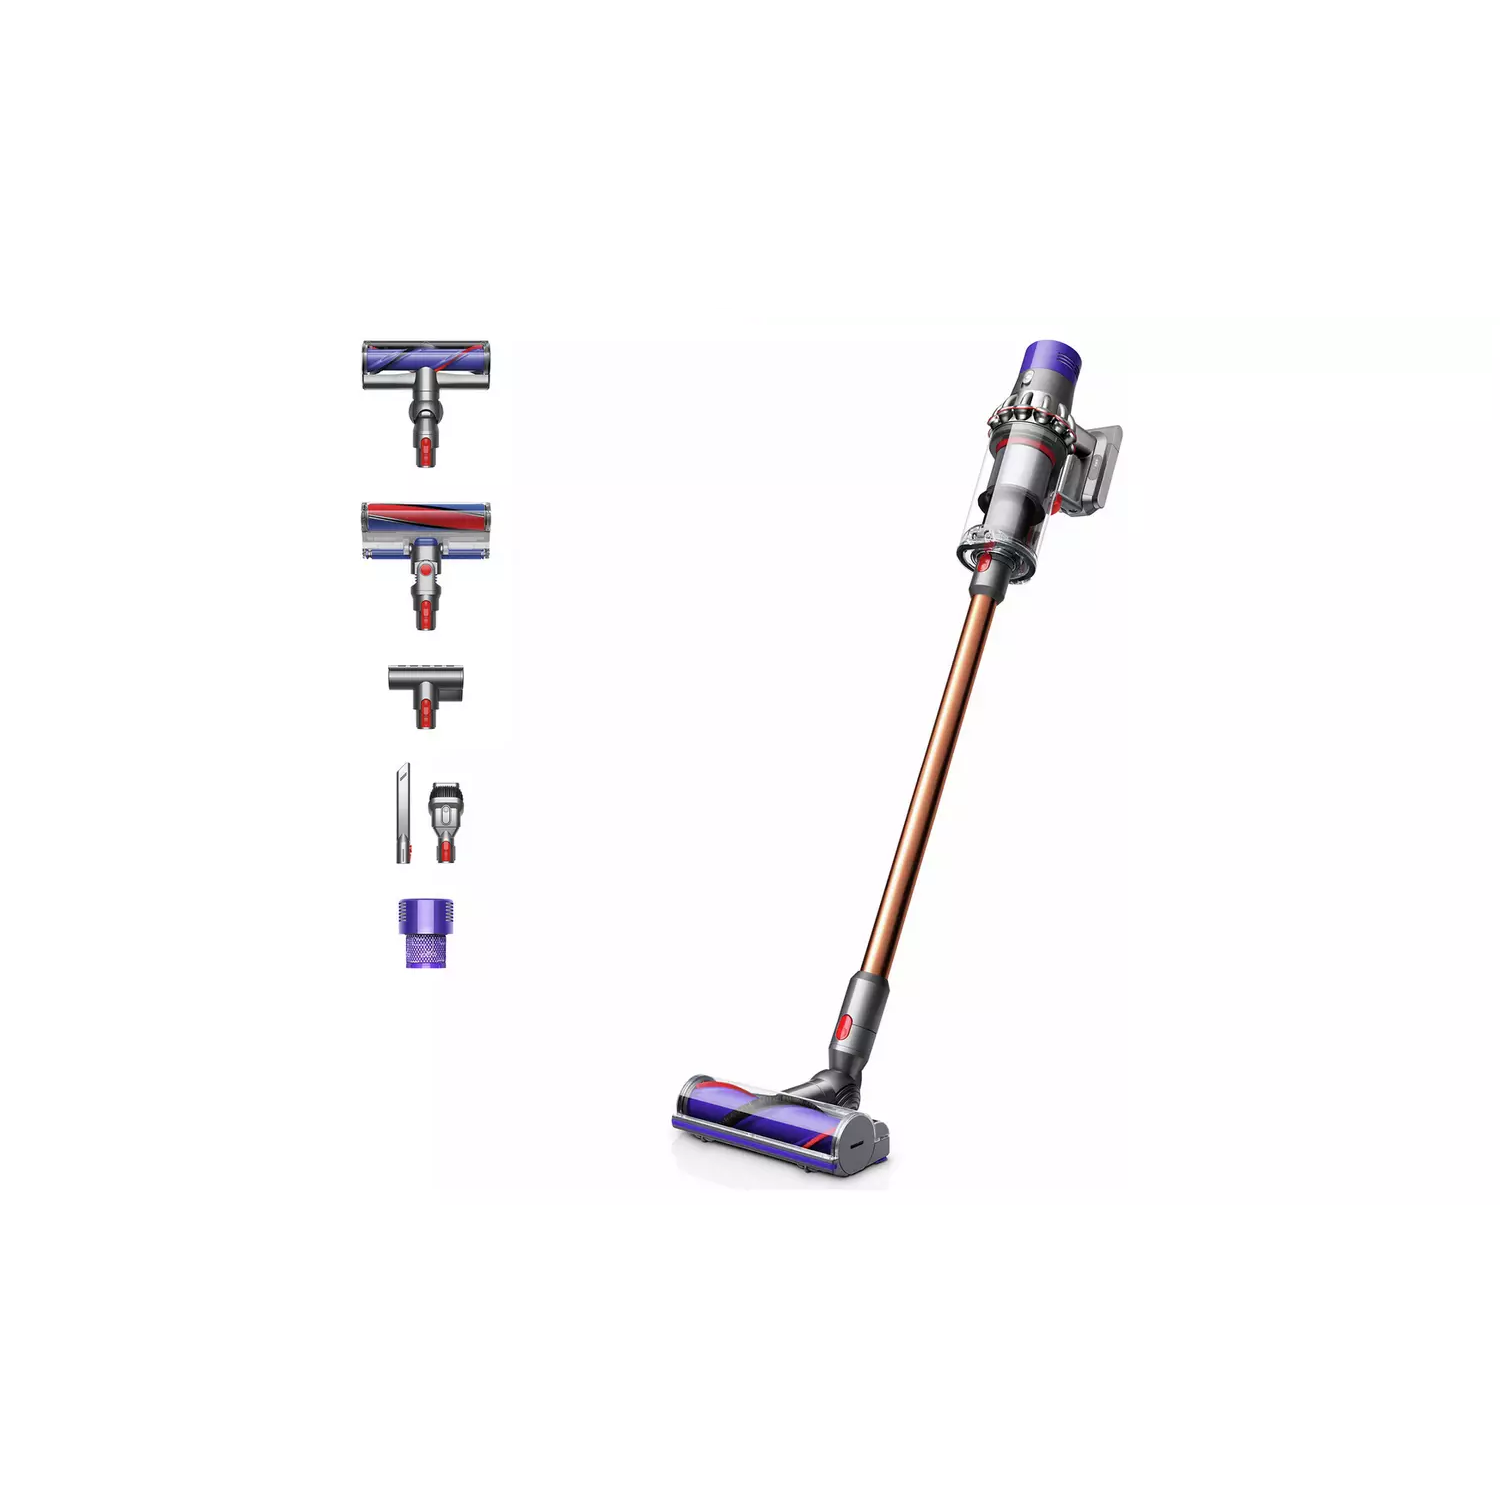 DYSON V10 Absolute Cordless Vacuum Cleaner – Nickel & Copper